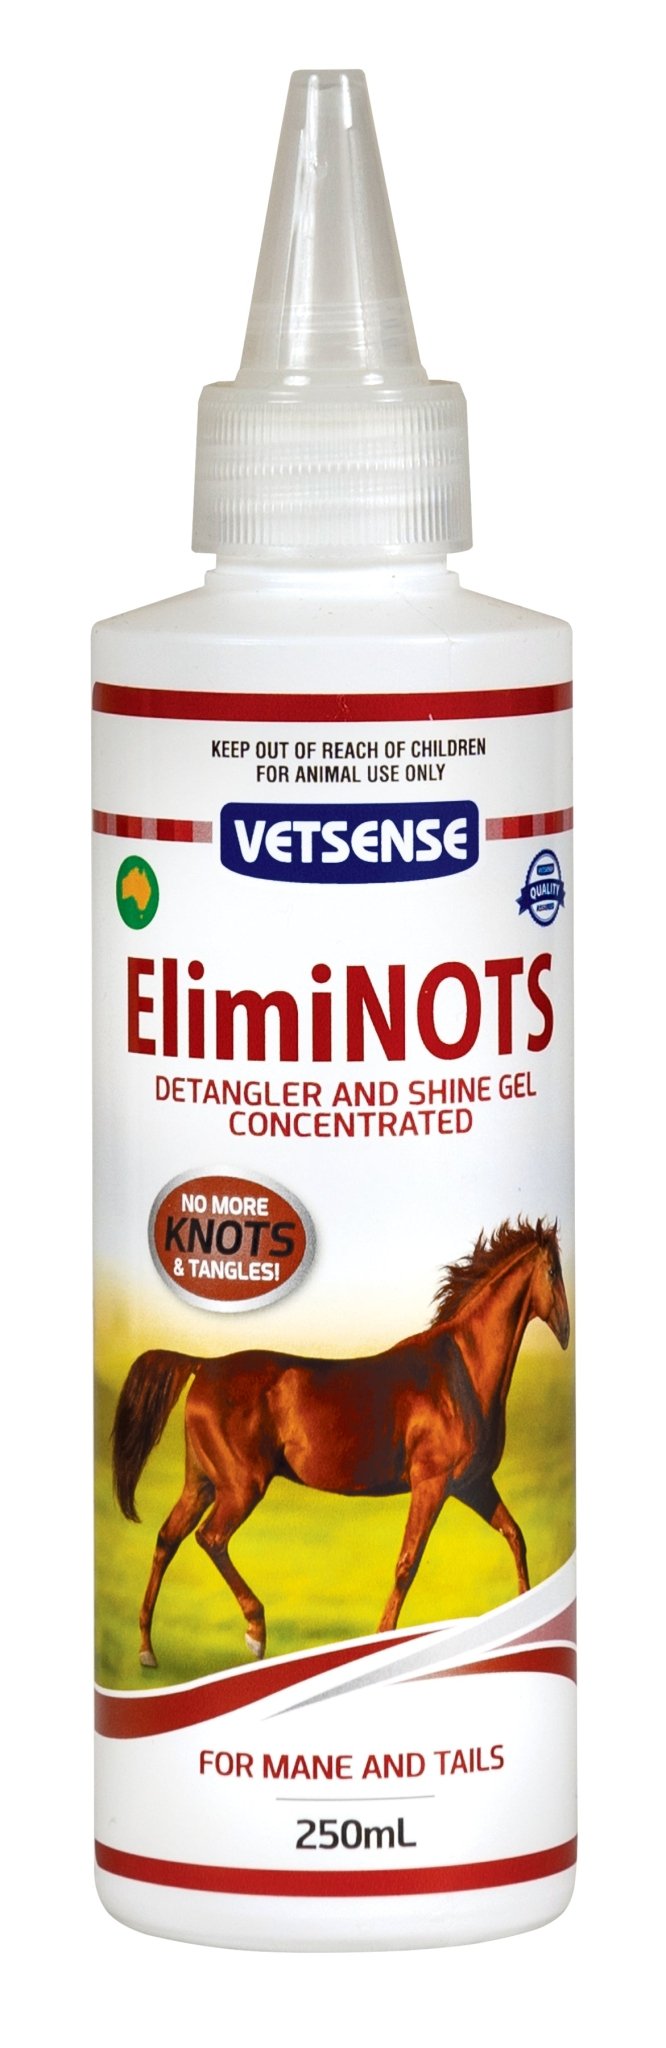 Image of Vetsense ElimiNOTS Detangler and Shine Gel Concentrated for Horses - available to purchase online from Saddleworld Dural.